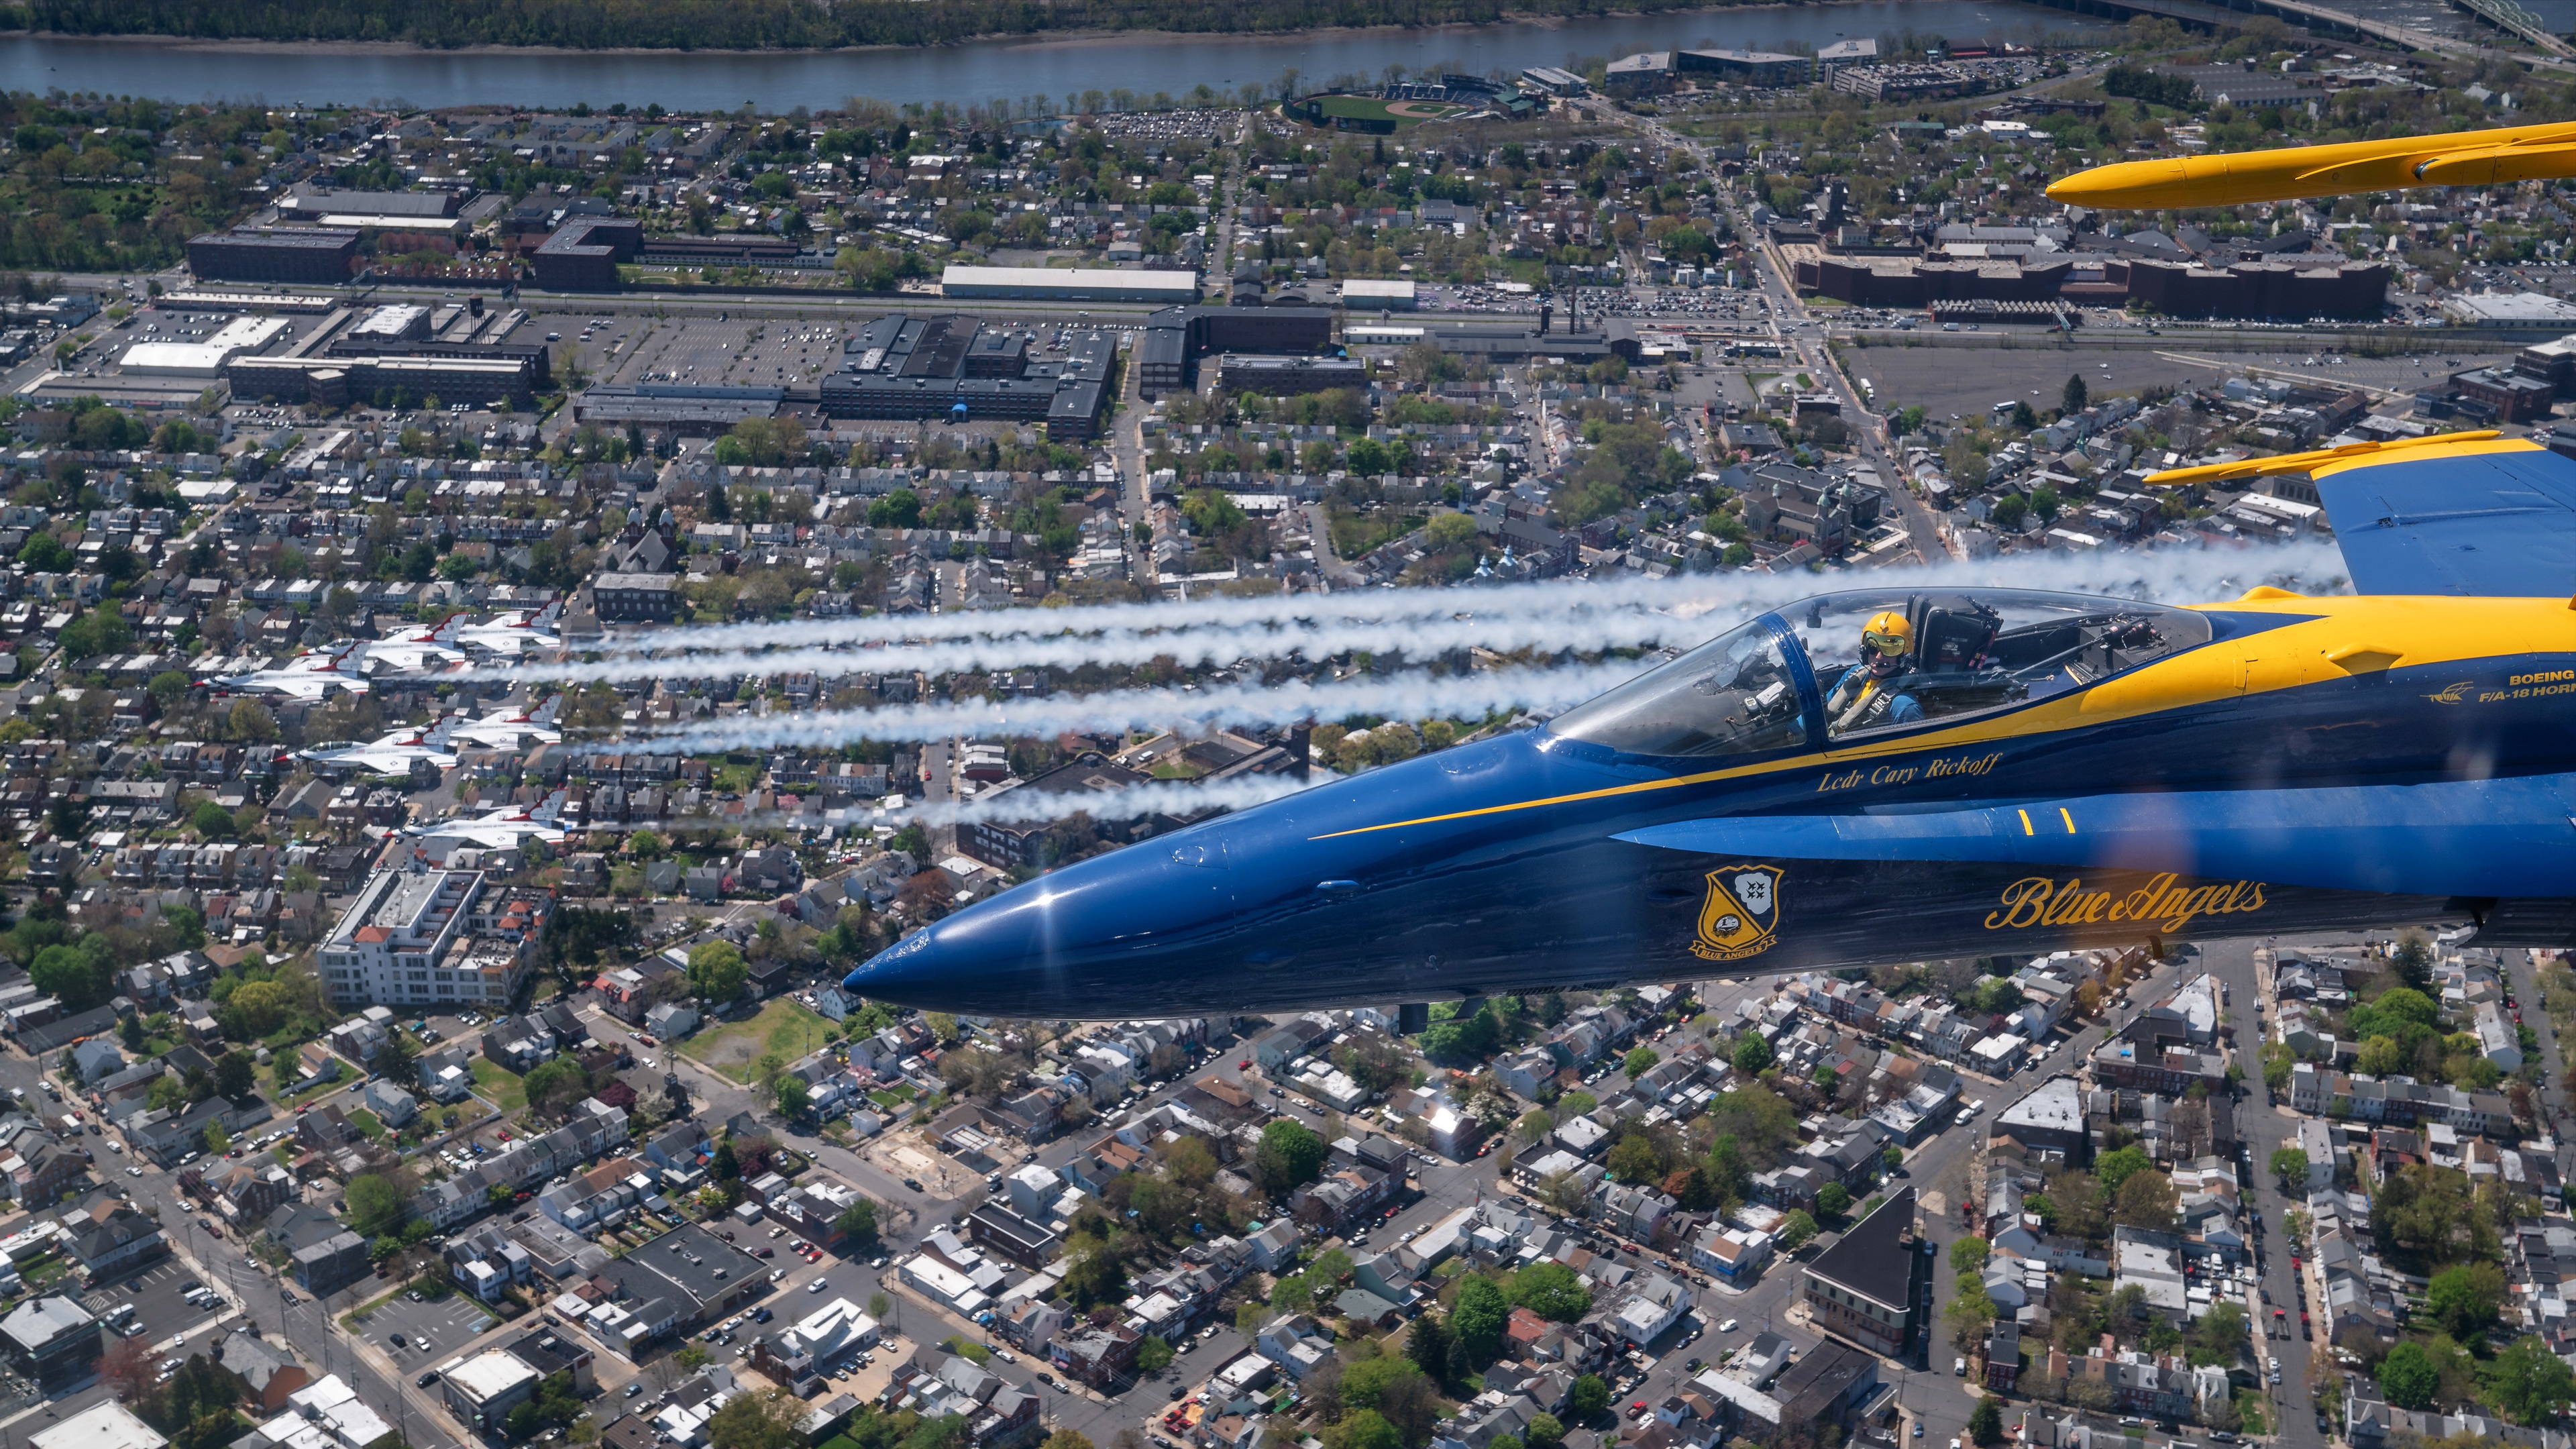 General 3840x2160 Blue Angels aircraft military military aircraft McDonnell Douglas F/A-18 Hornet General Dynamics F-16 Fighting Falcon General Dynamics vehicle city United States Navy landscape thunderbirds military vehicle smoke American aircraft pilot